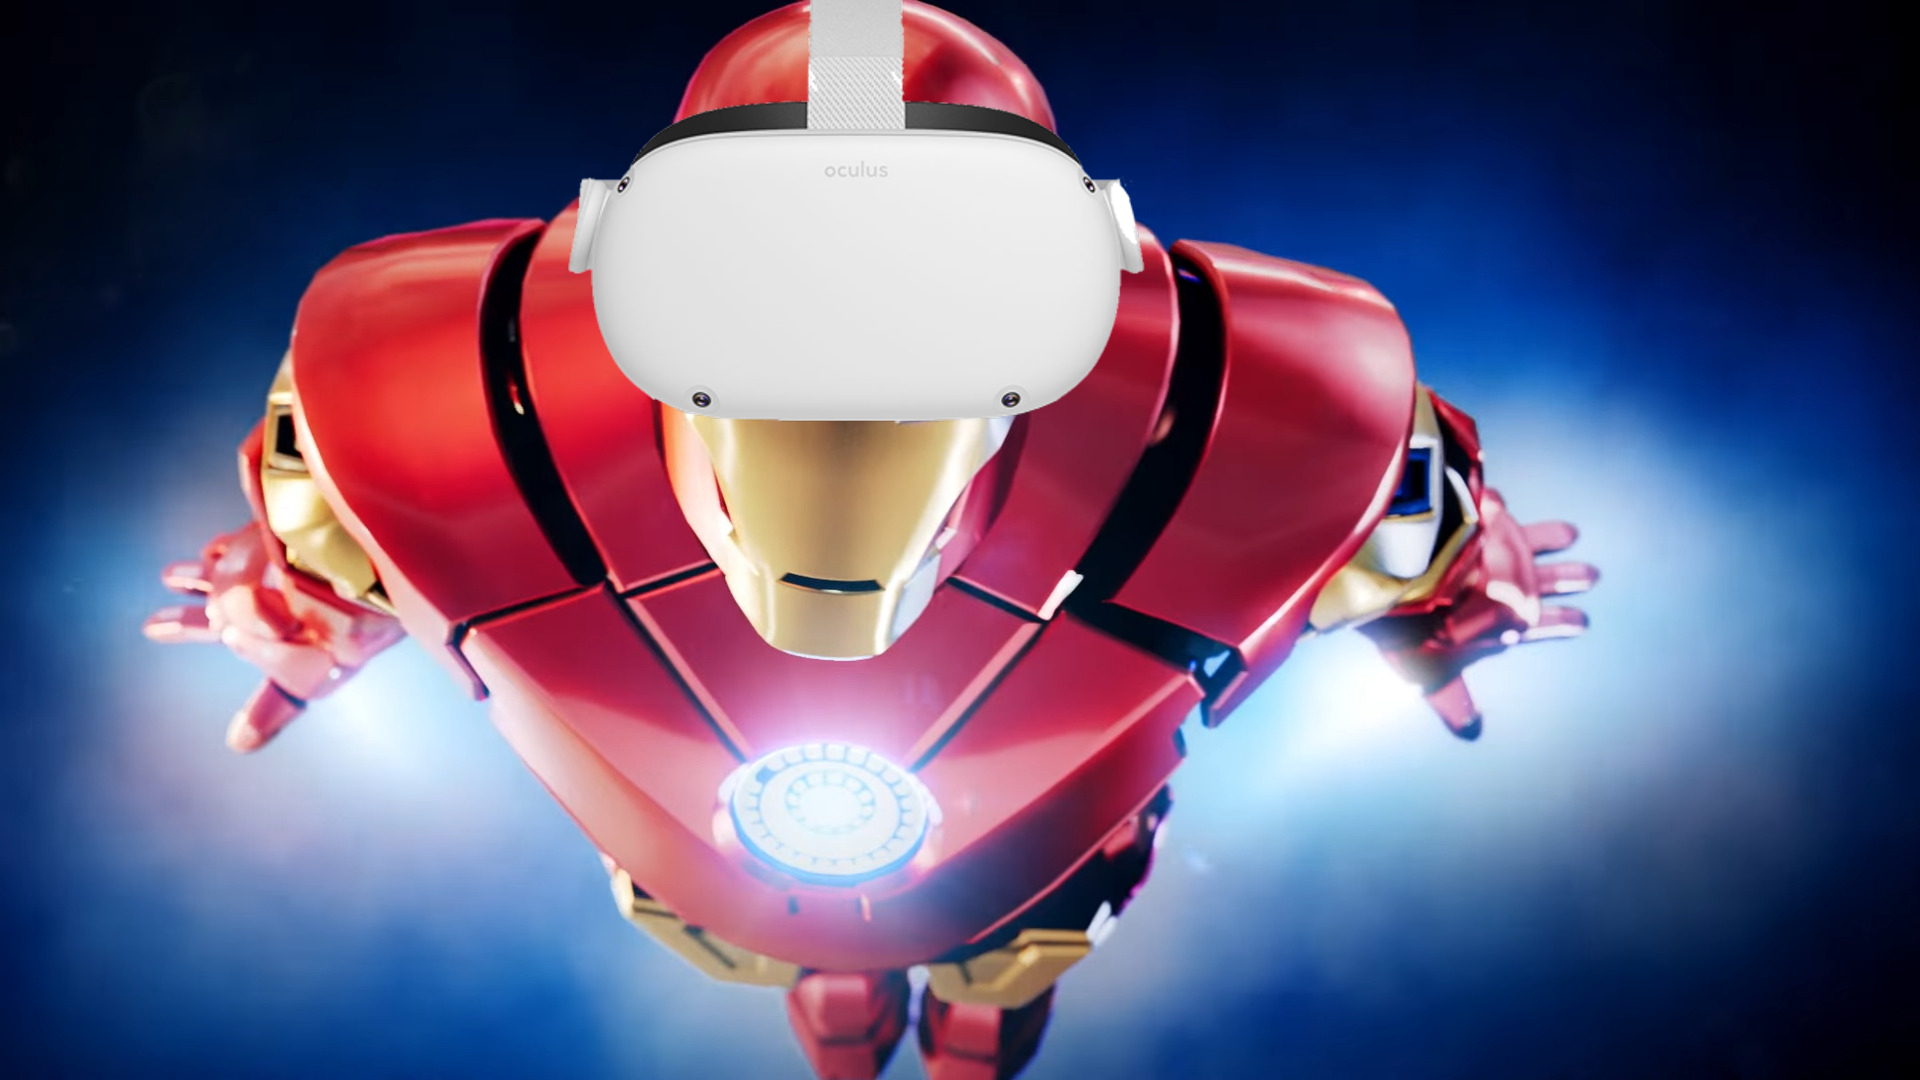 Former PSVR exclusive Iron Man VR jumps to Oculus Quest 2 today